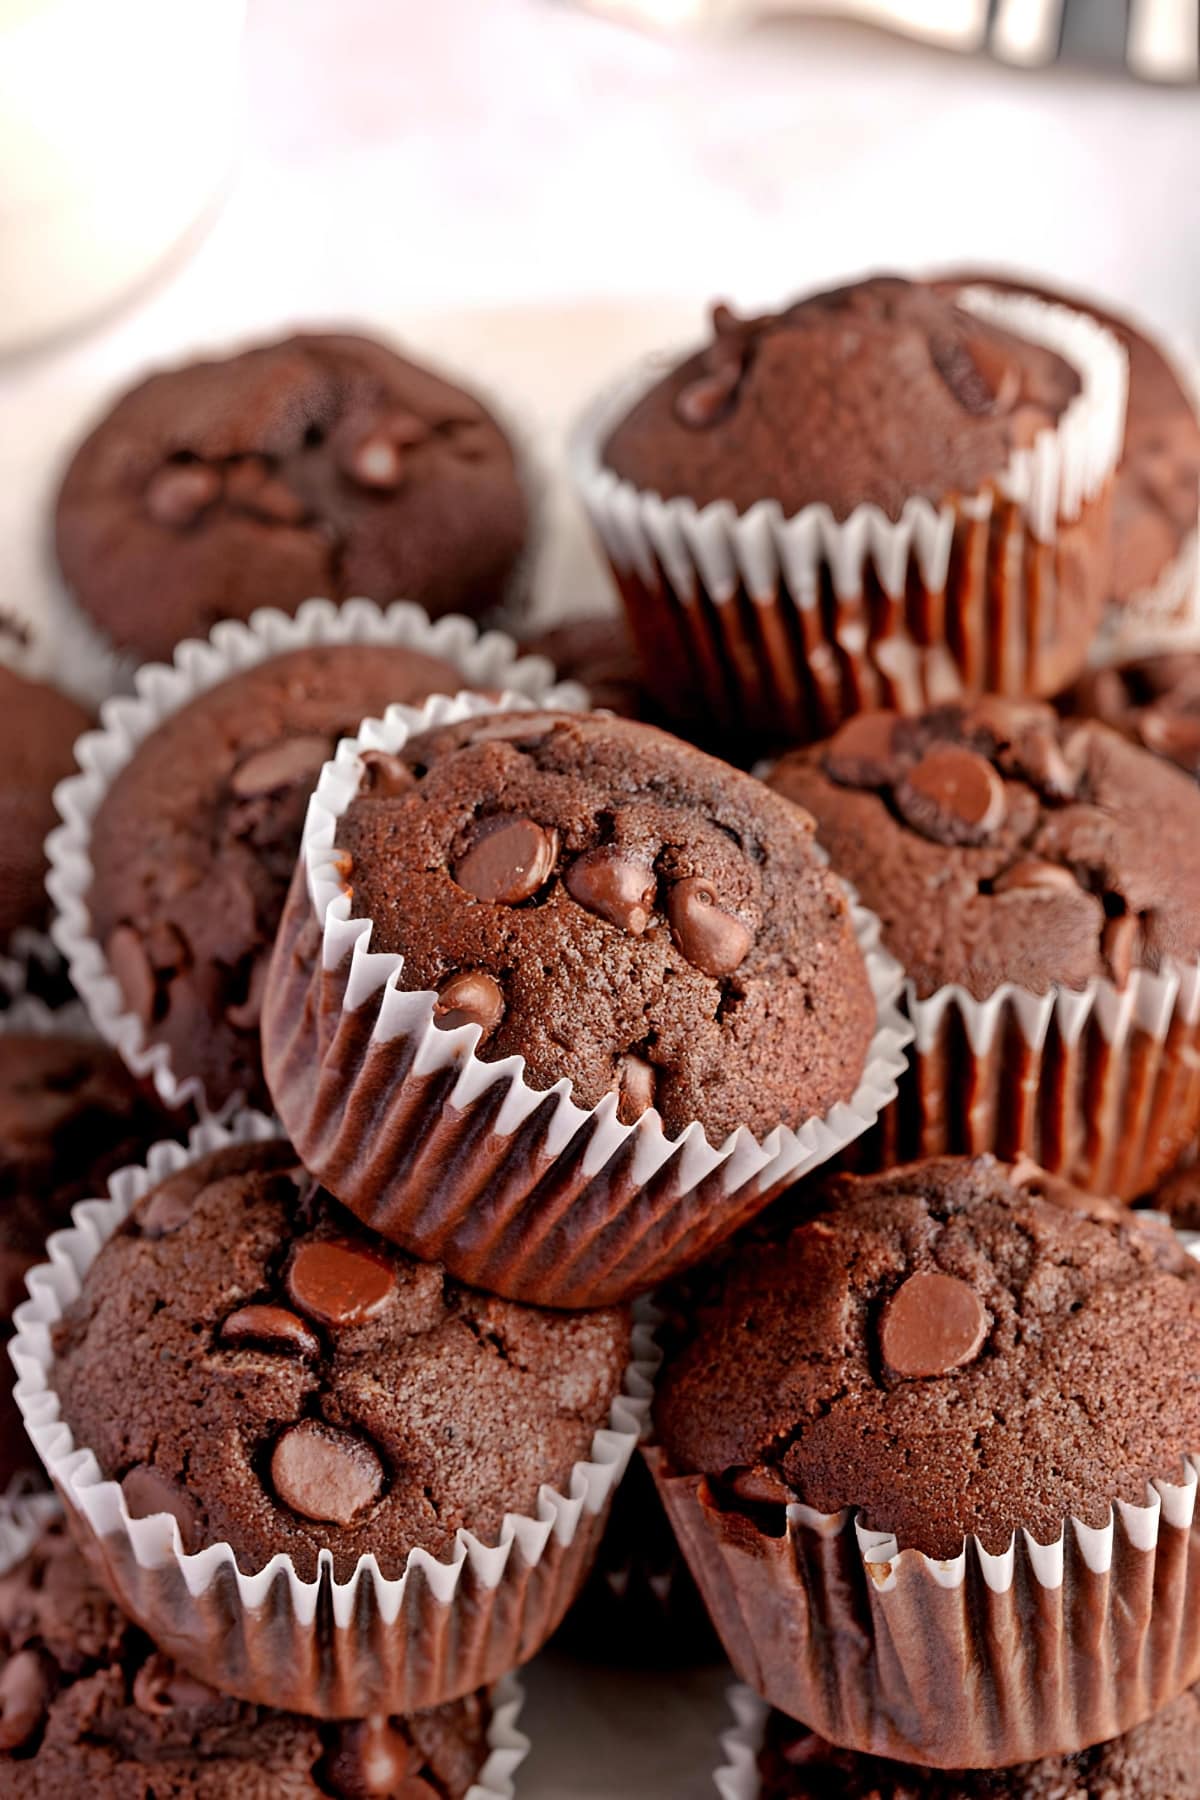 Bunch of Chocolate Muffins with Chocolate Chips on Top